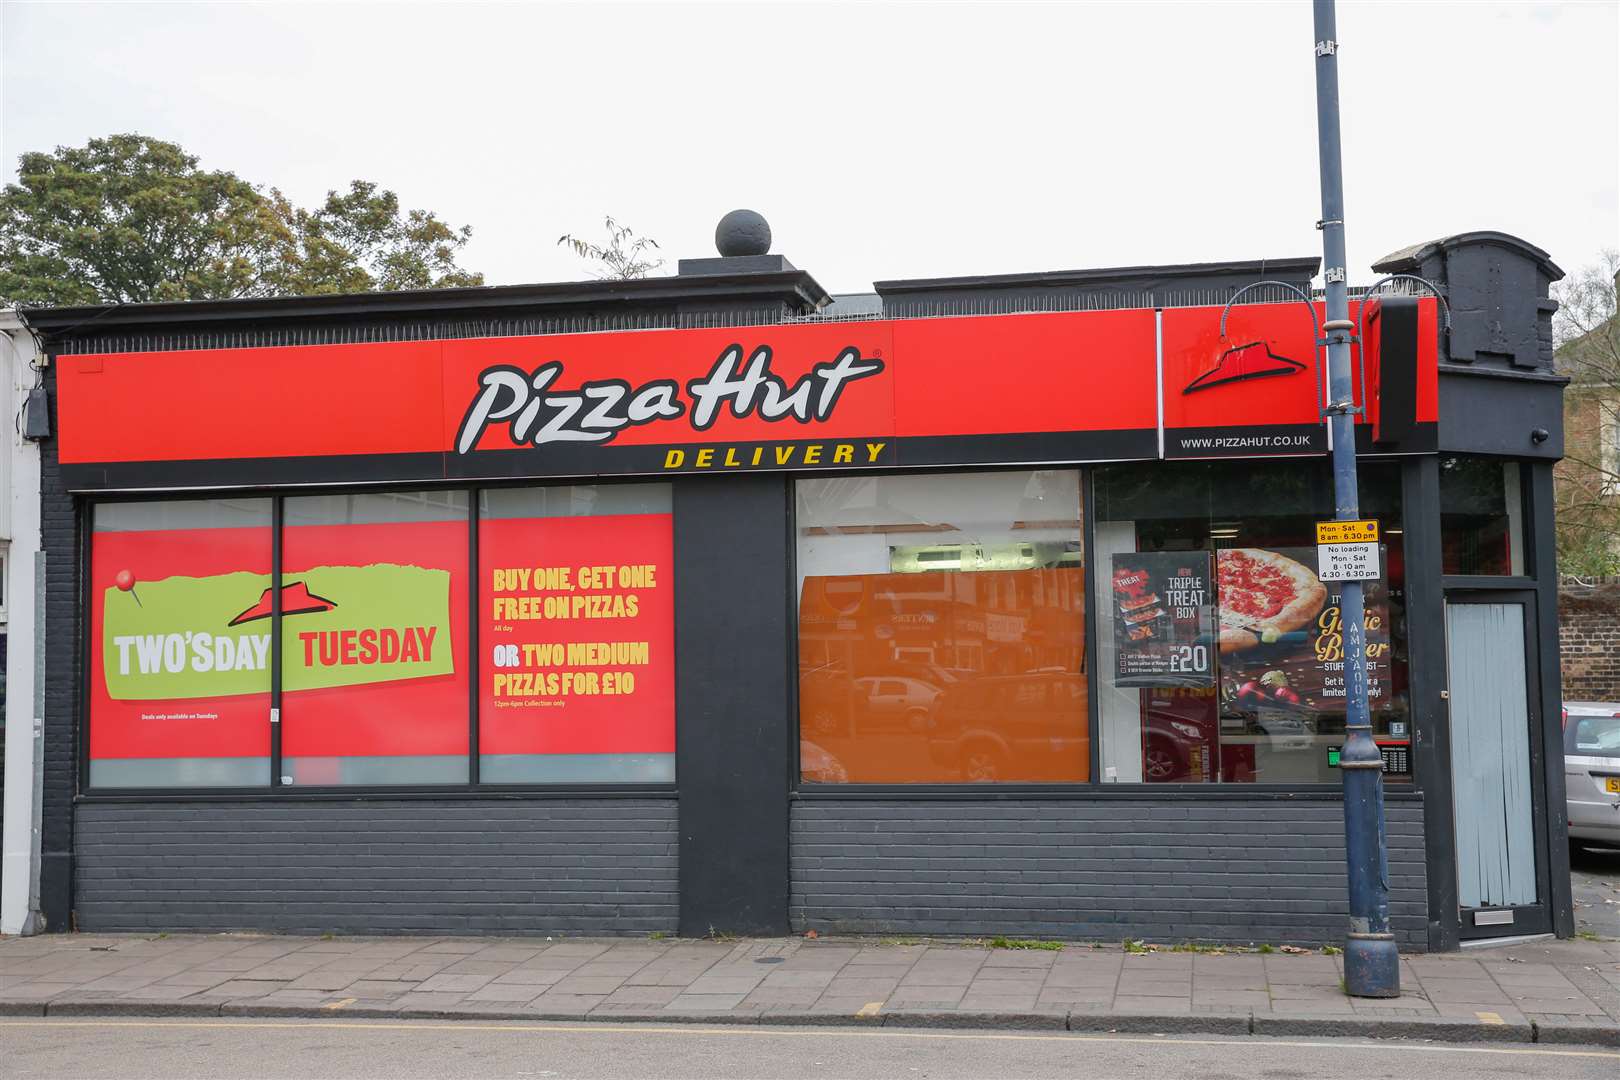 Pizza Hut in Market Street - there is another one in nearby Prospect Place